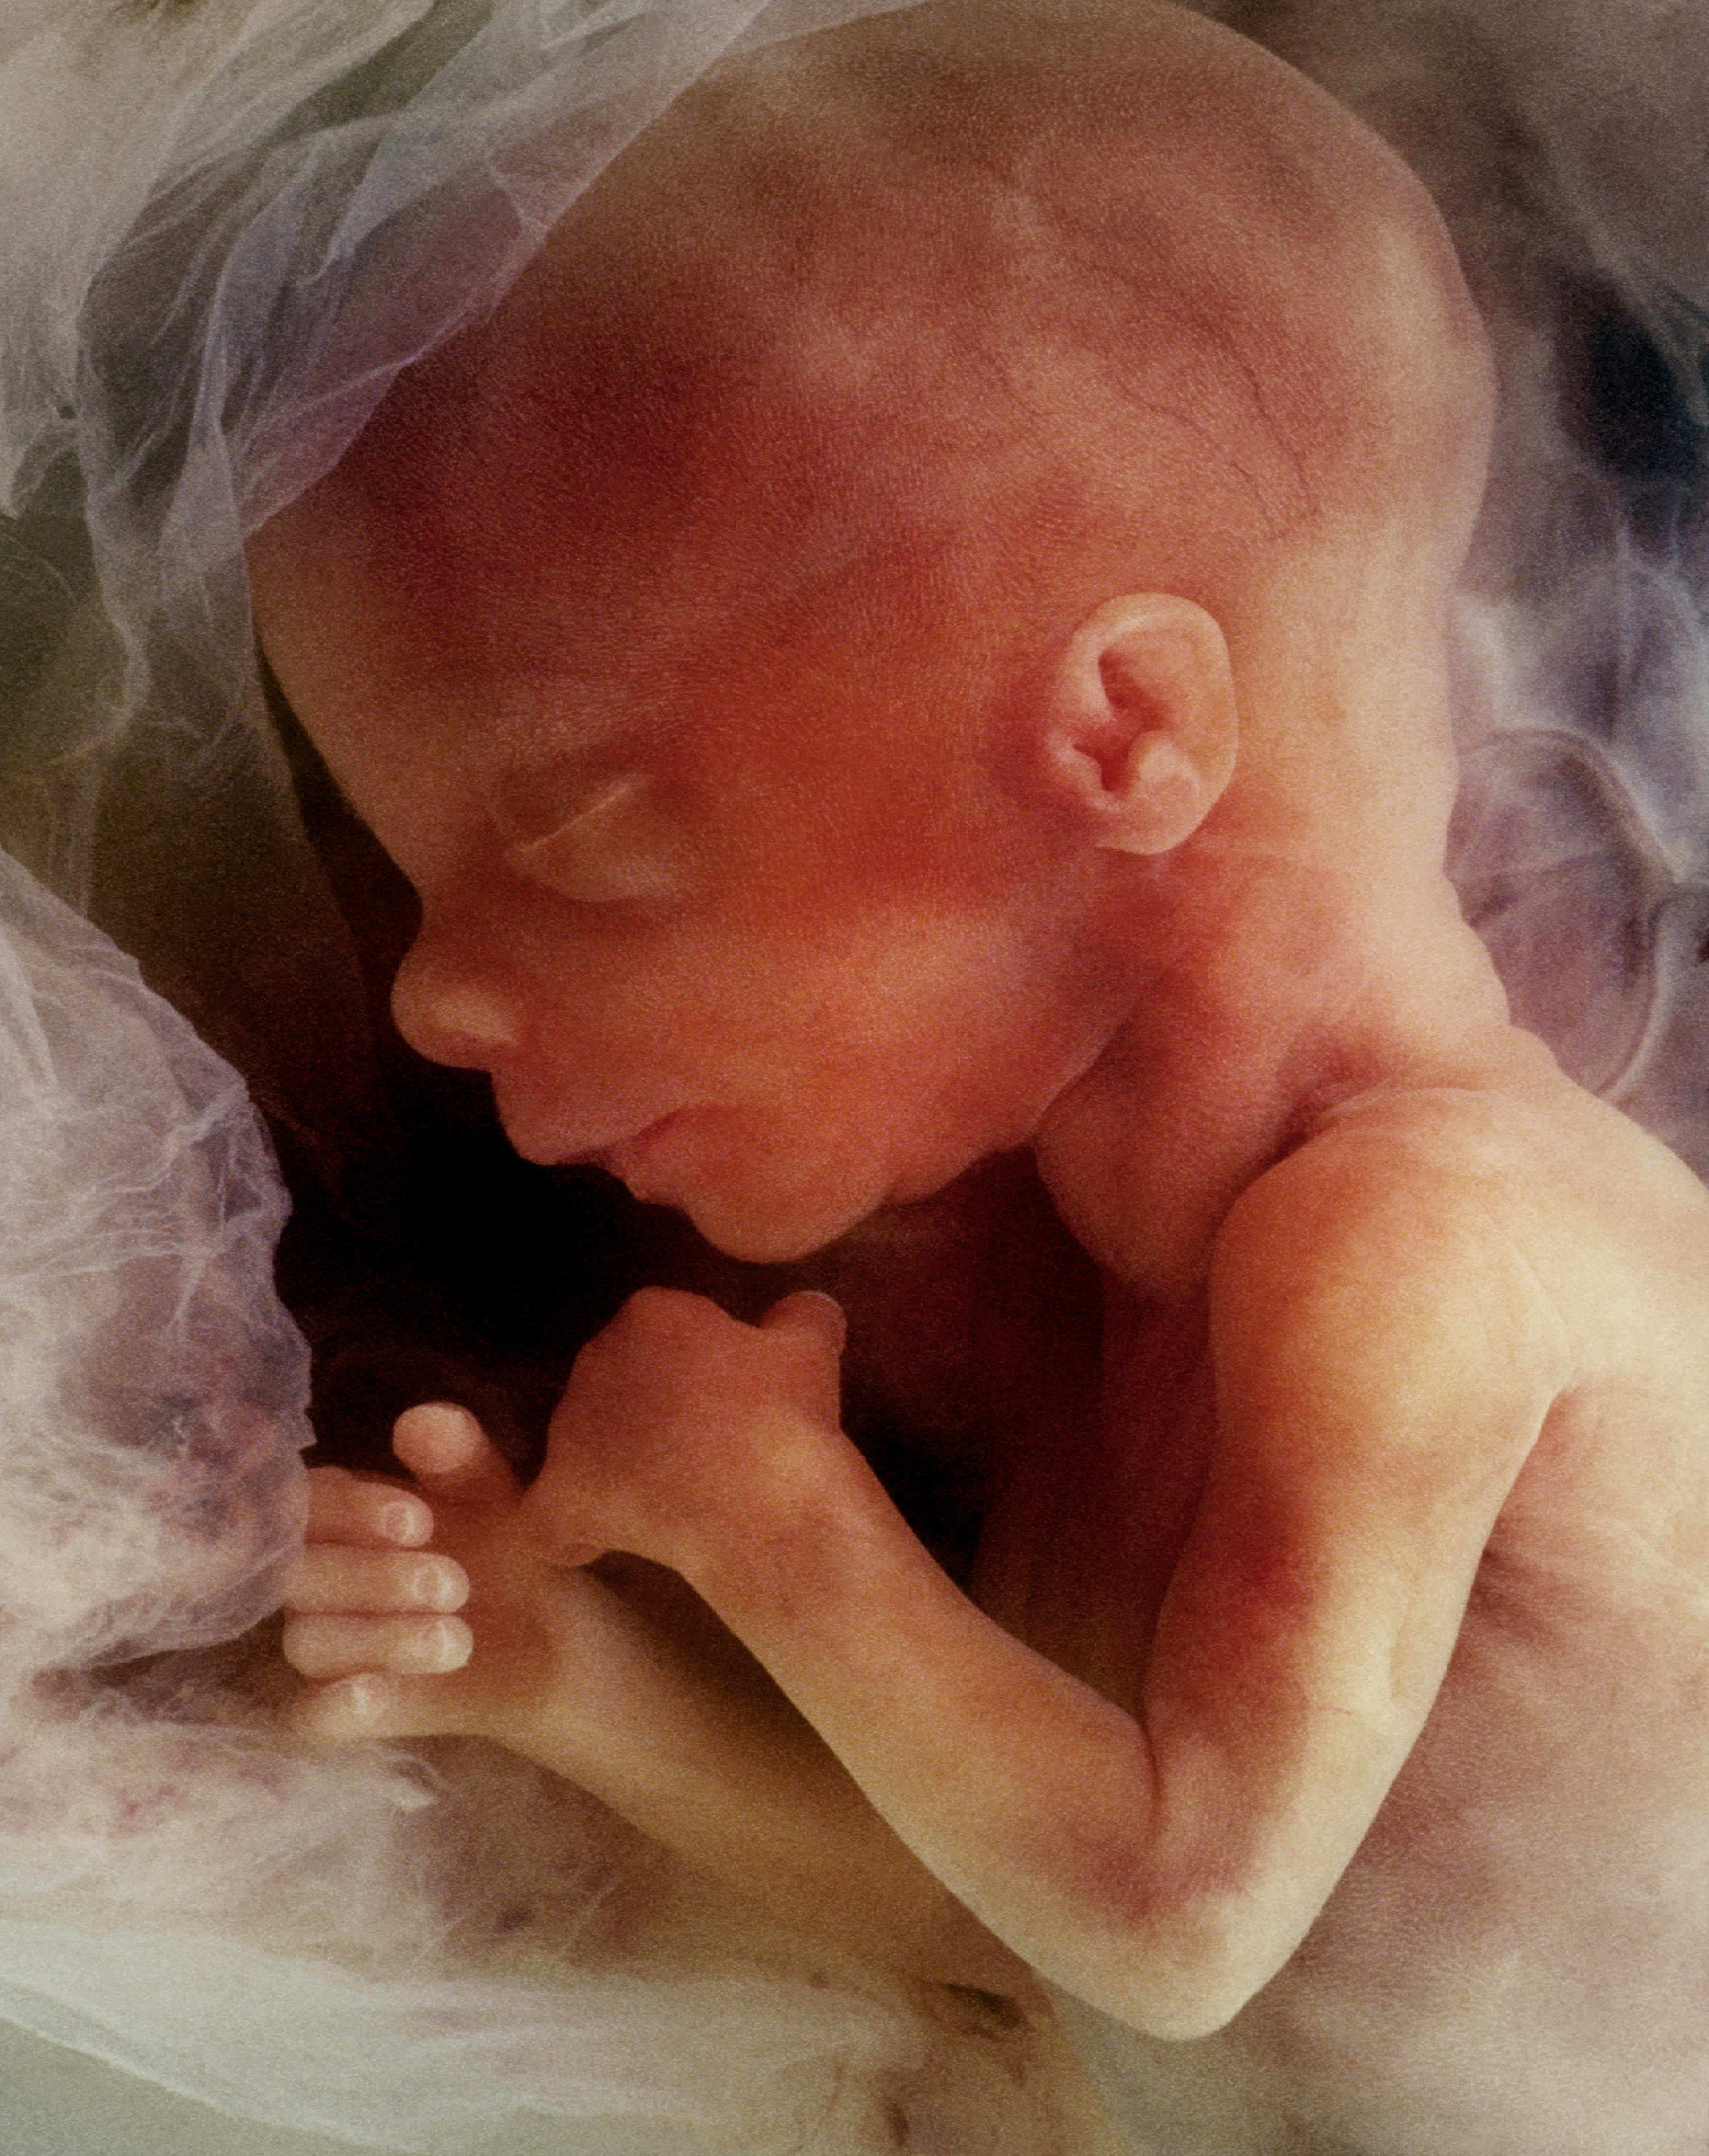 baby with arms, legs, ears, and eyes in the womb